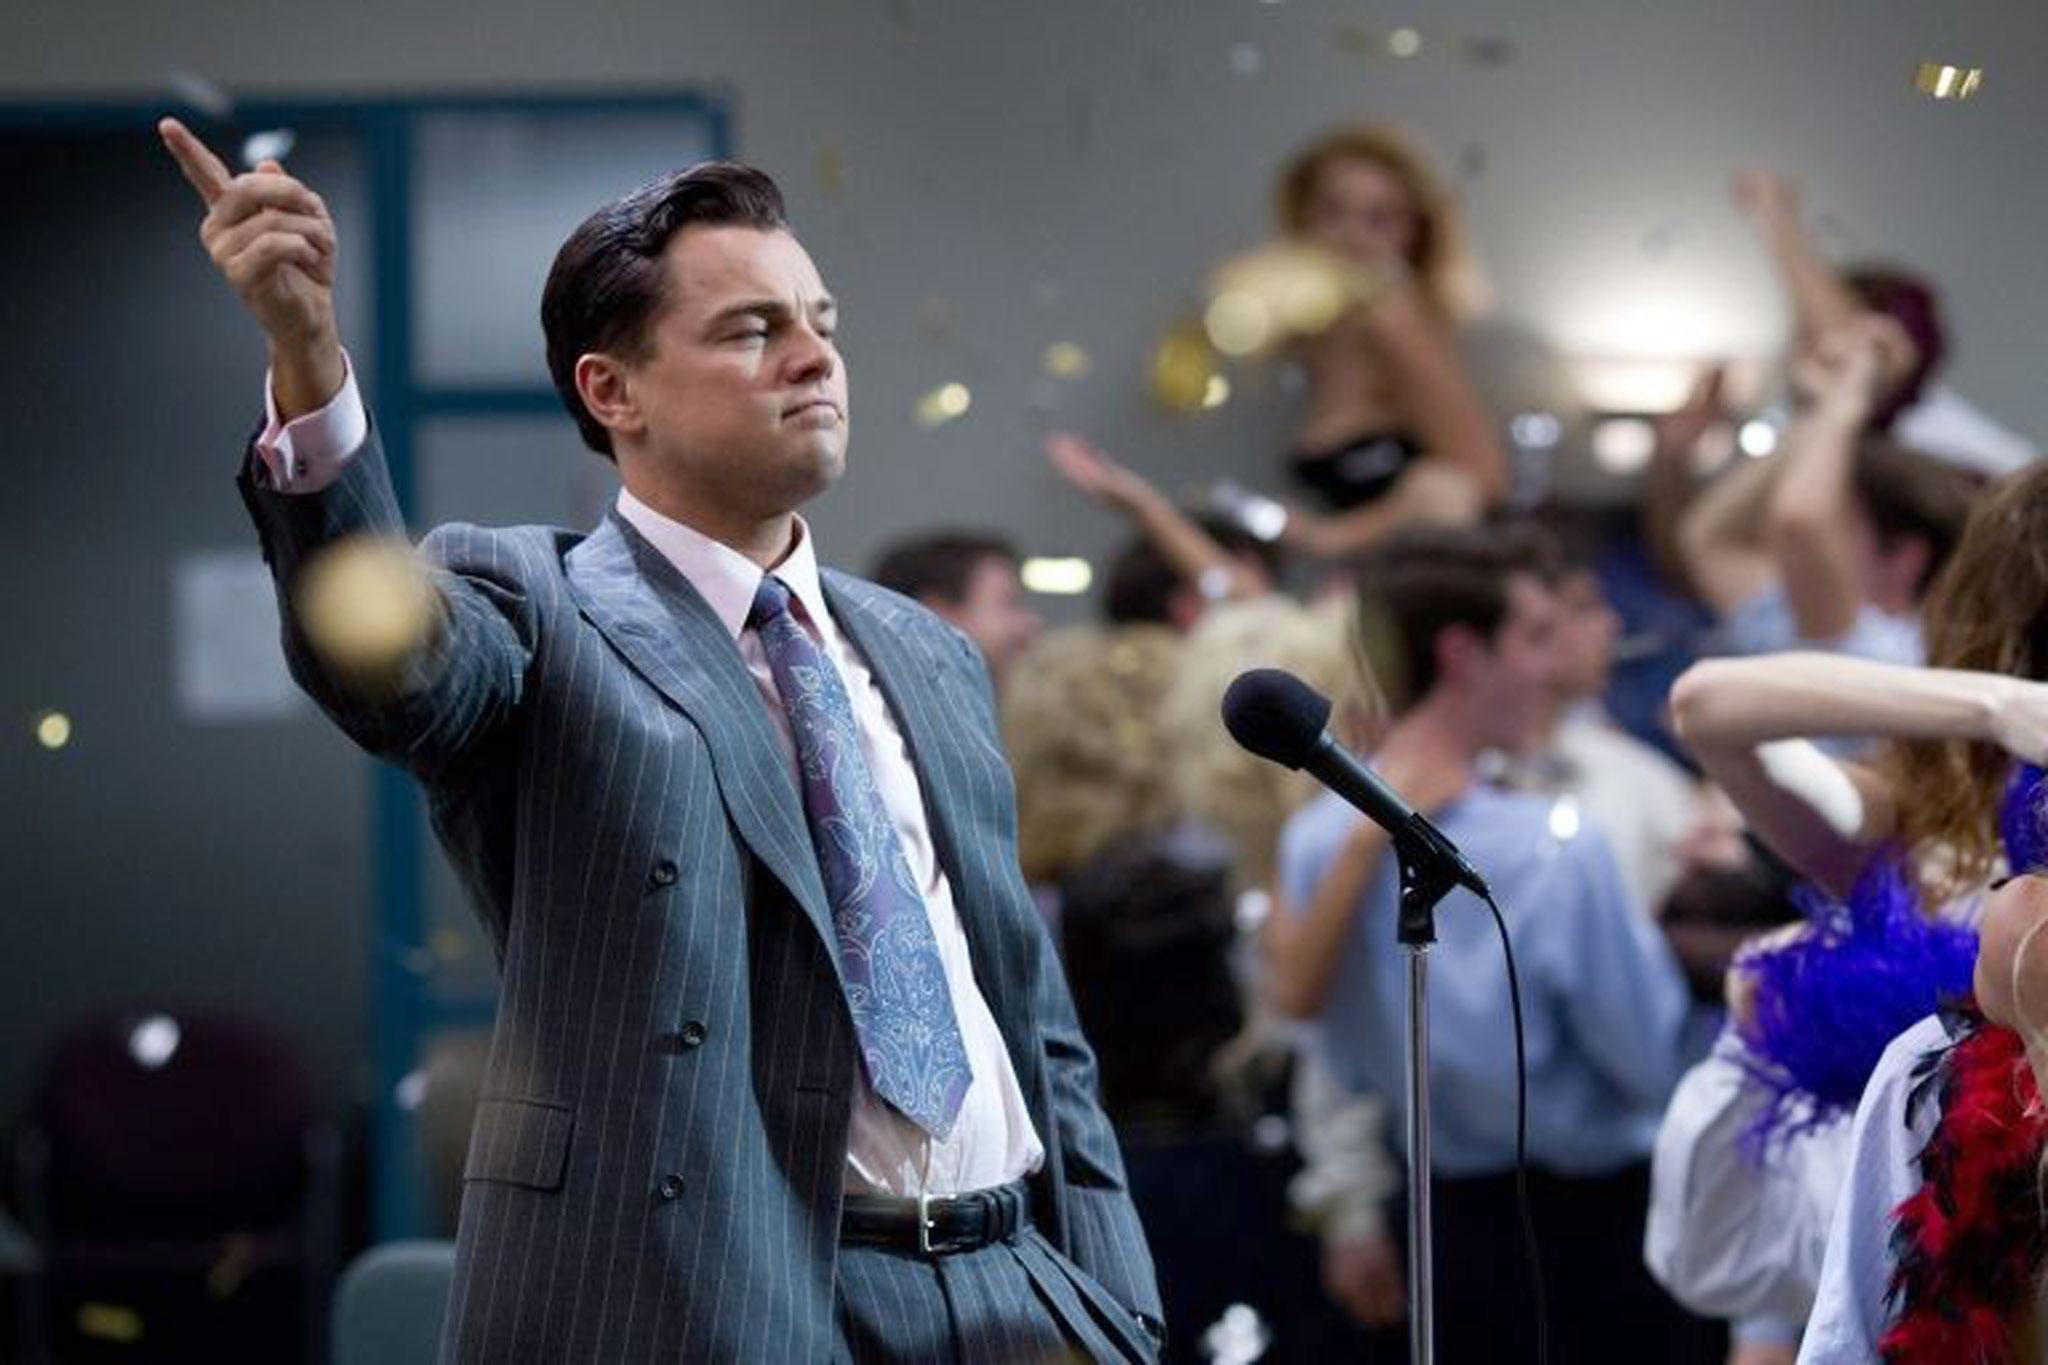 Leonardo DiCaprio stars in The Wolf of Wall Street